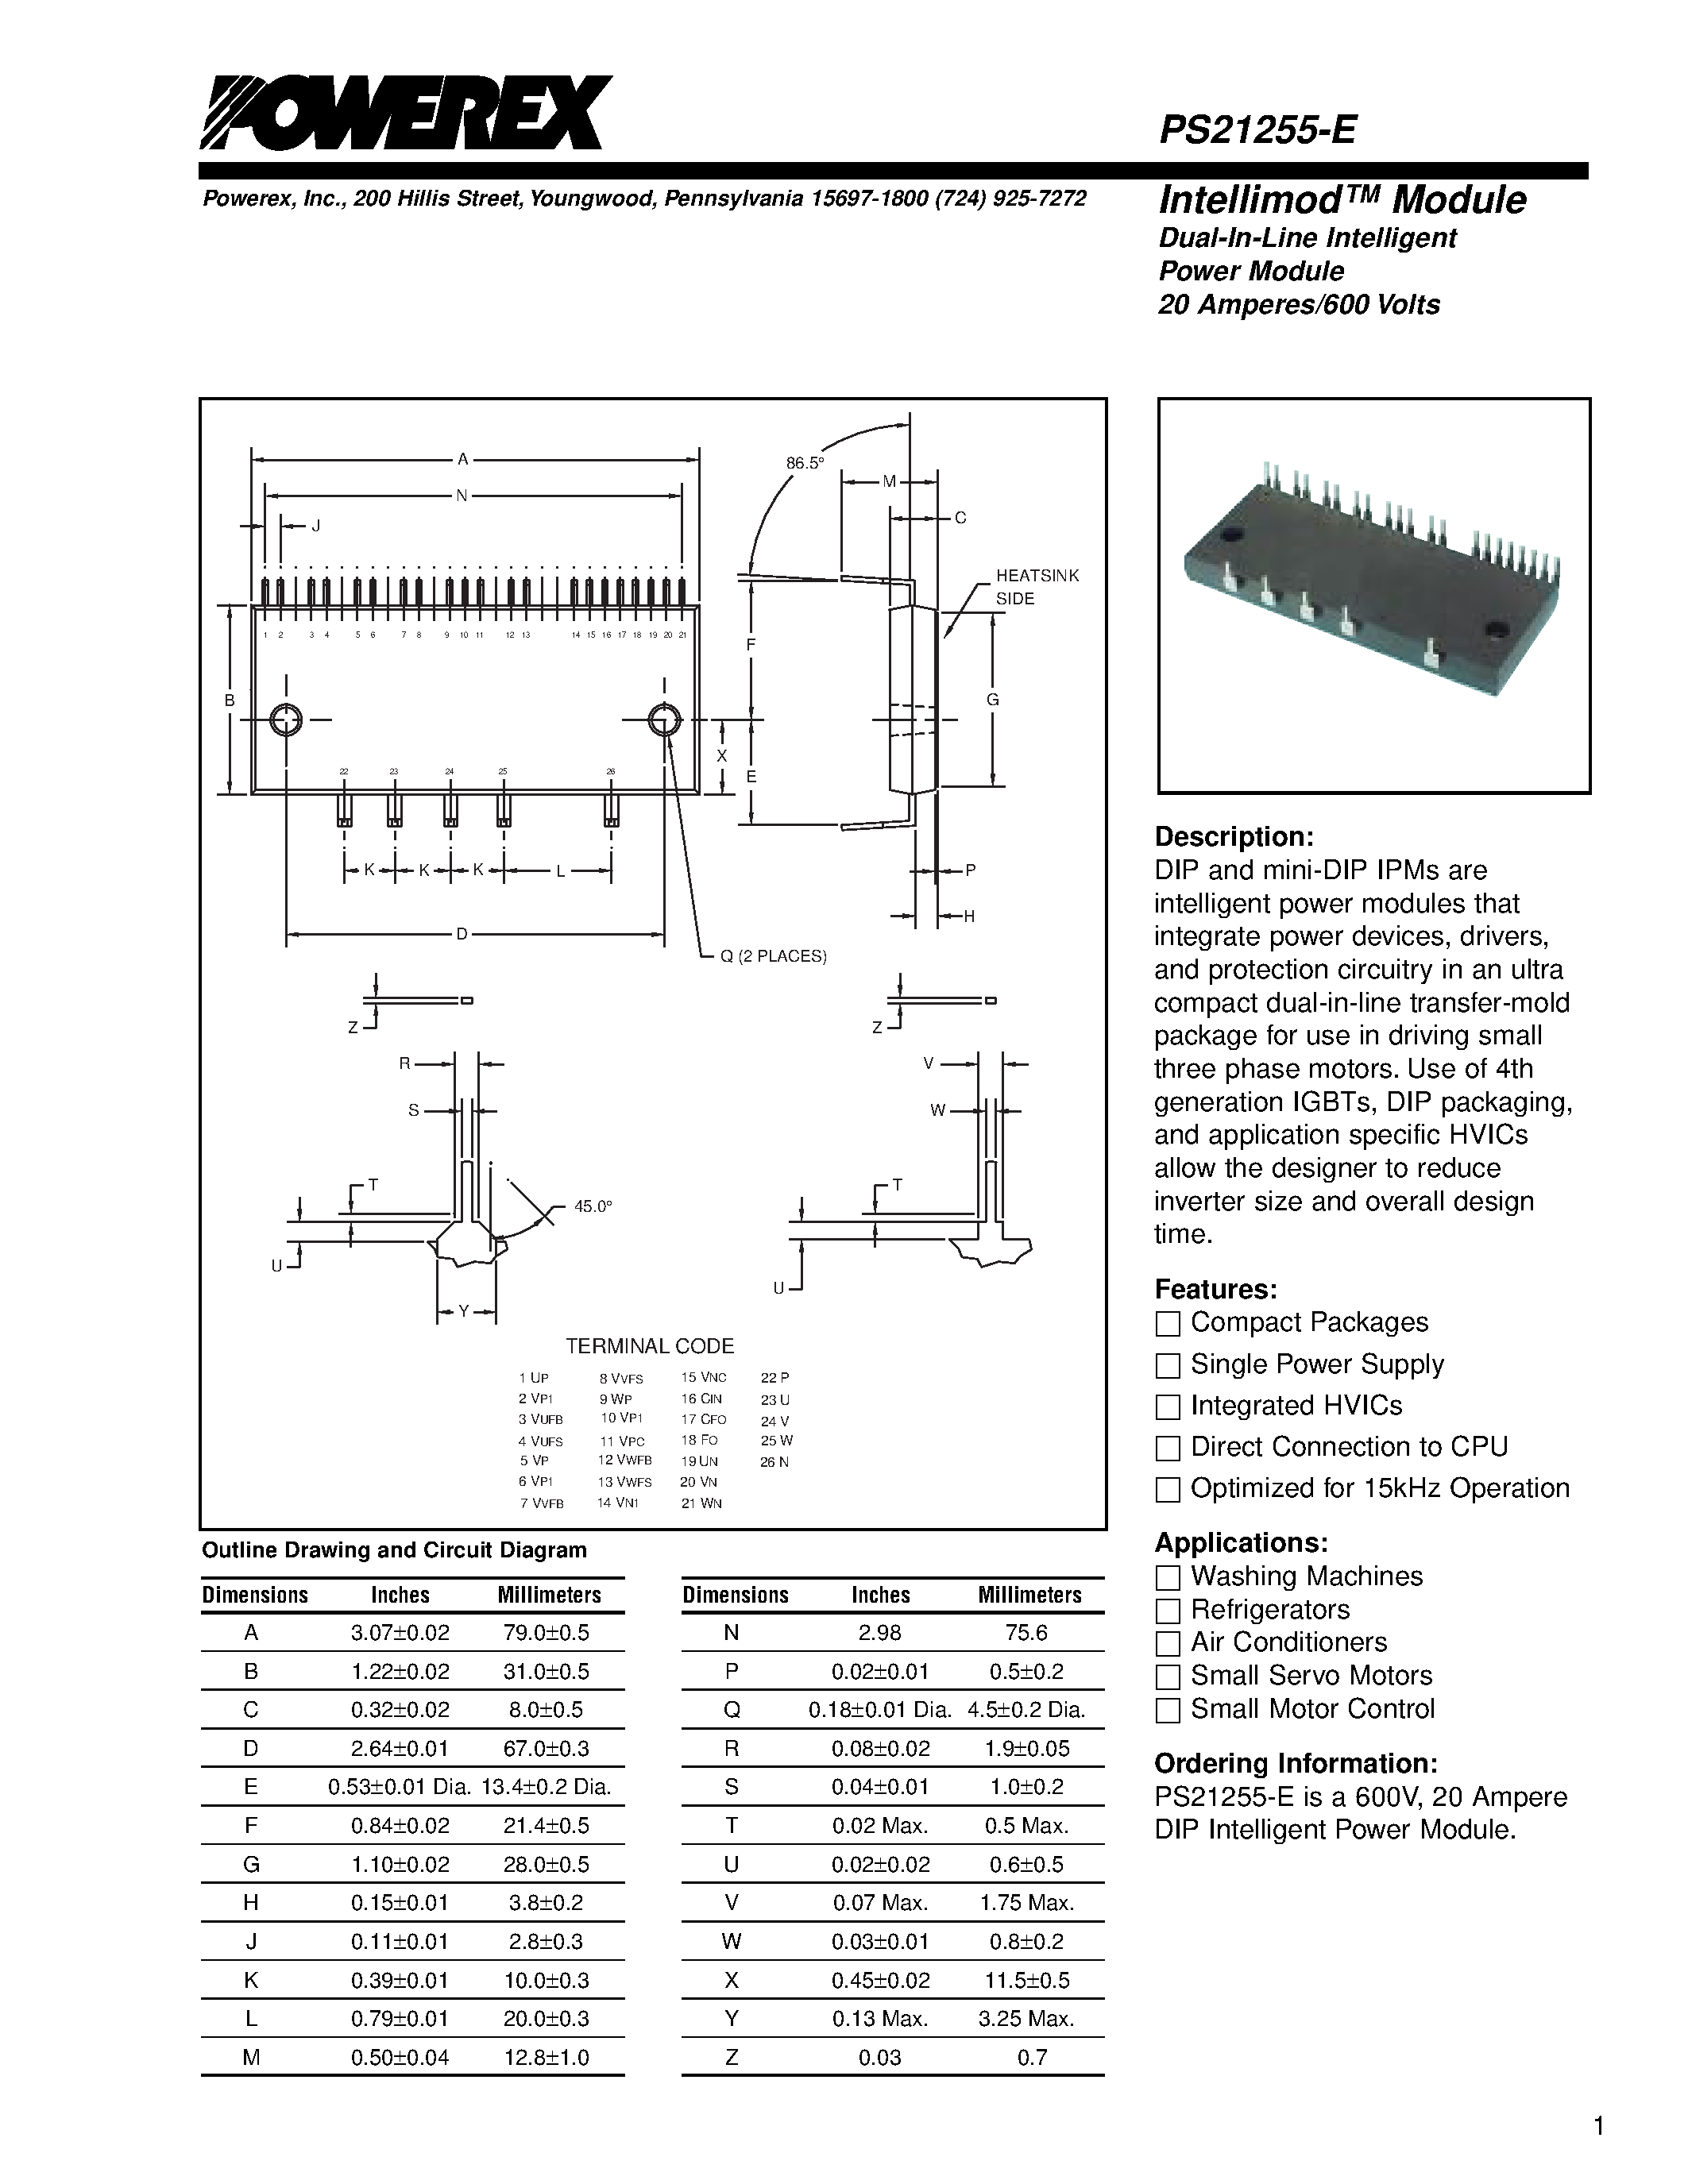 Datasheet PS21255-E - Intellimod Module Dual-In-Line Intelligent Power Module 20 Amperes/600 Volts page 1